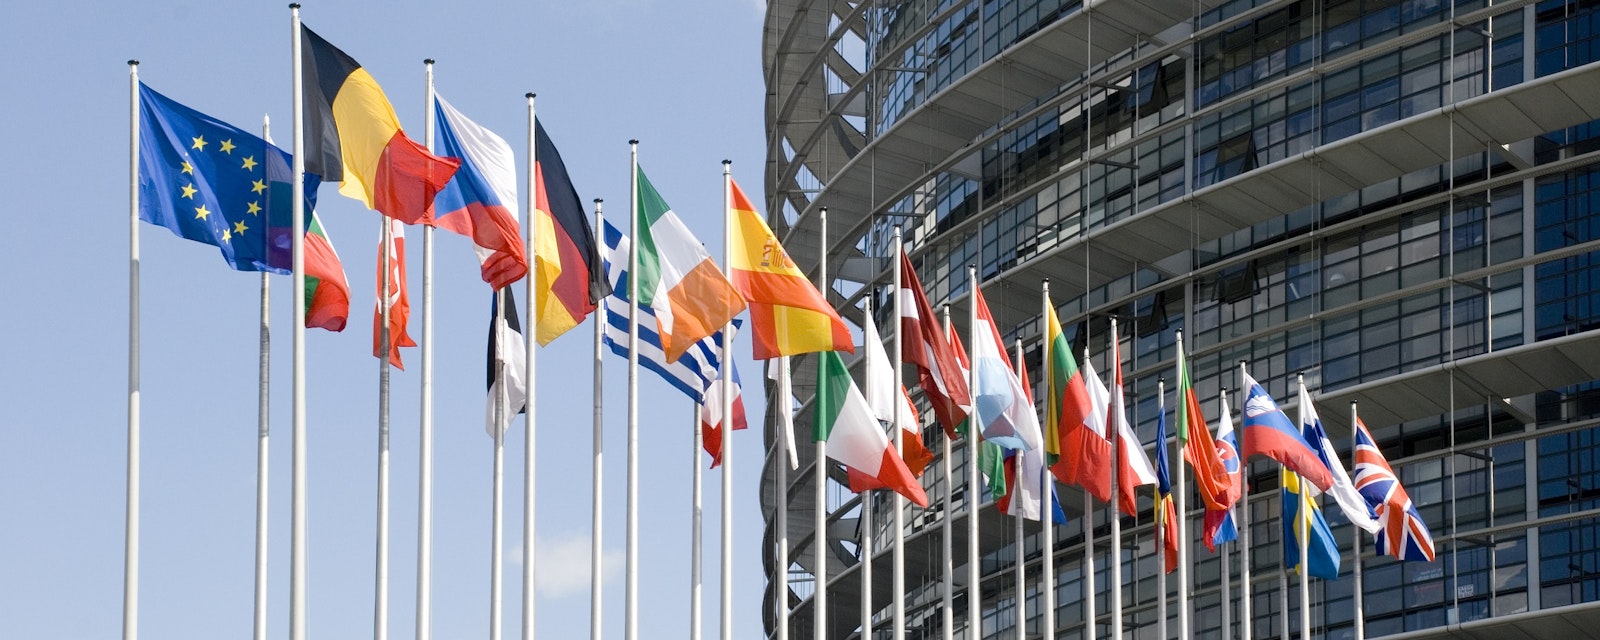 Europarliament.,Flags,Of,The,Countries,Of,The,European,Union,At